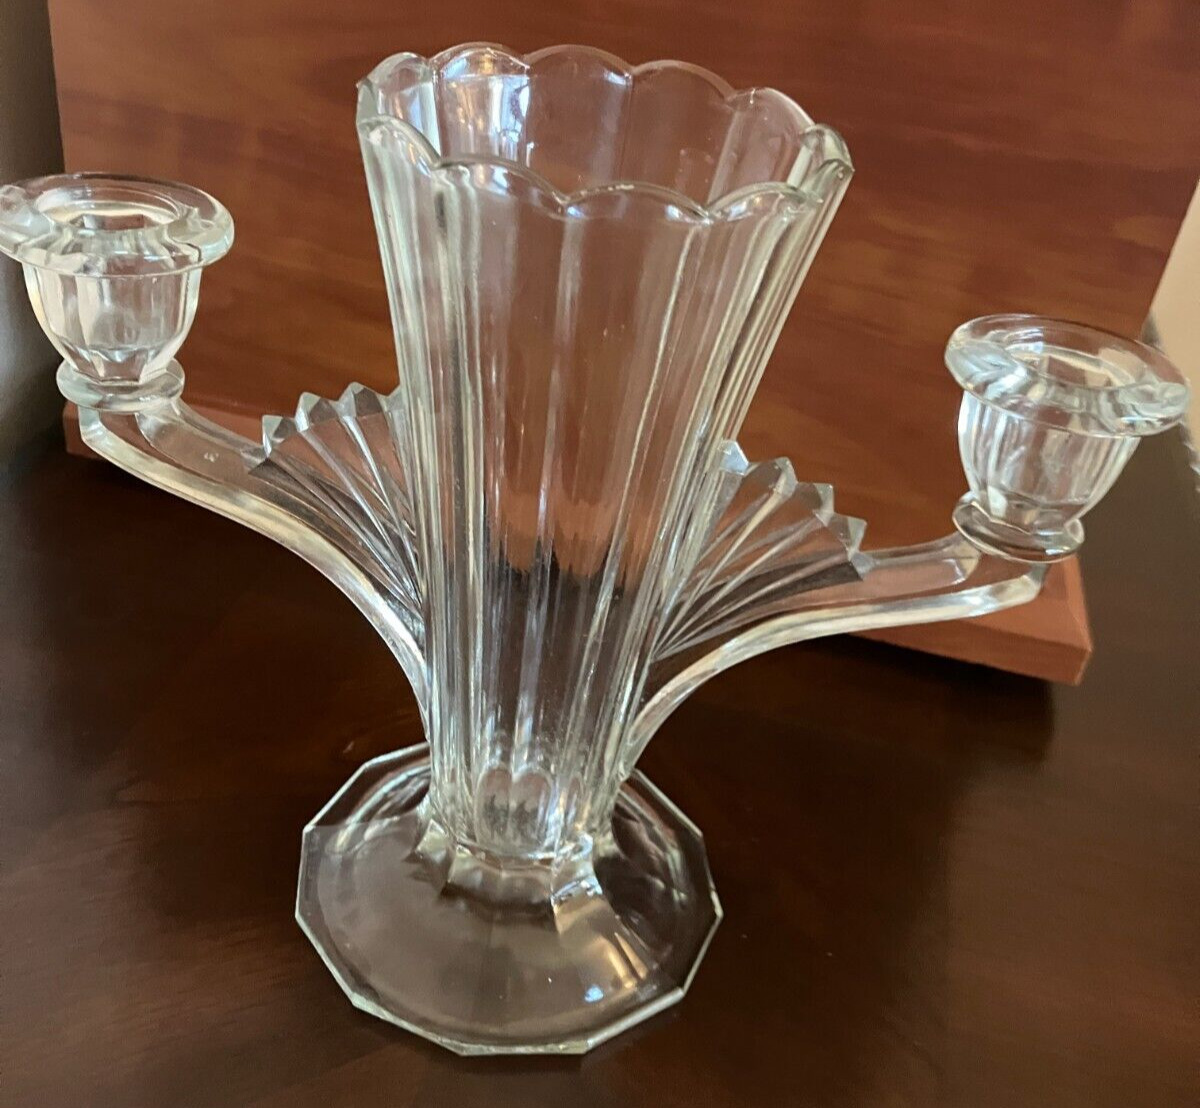 REDUCED   Jeanette Glass Deco Vase with 2 candleholders Circa 1935 - 1940